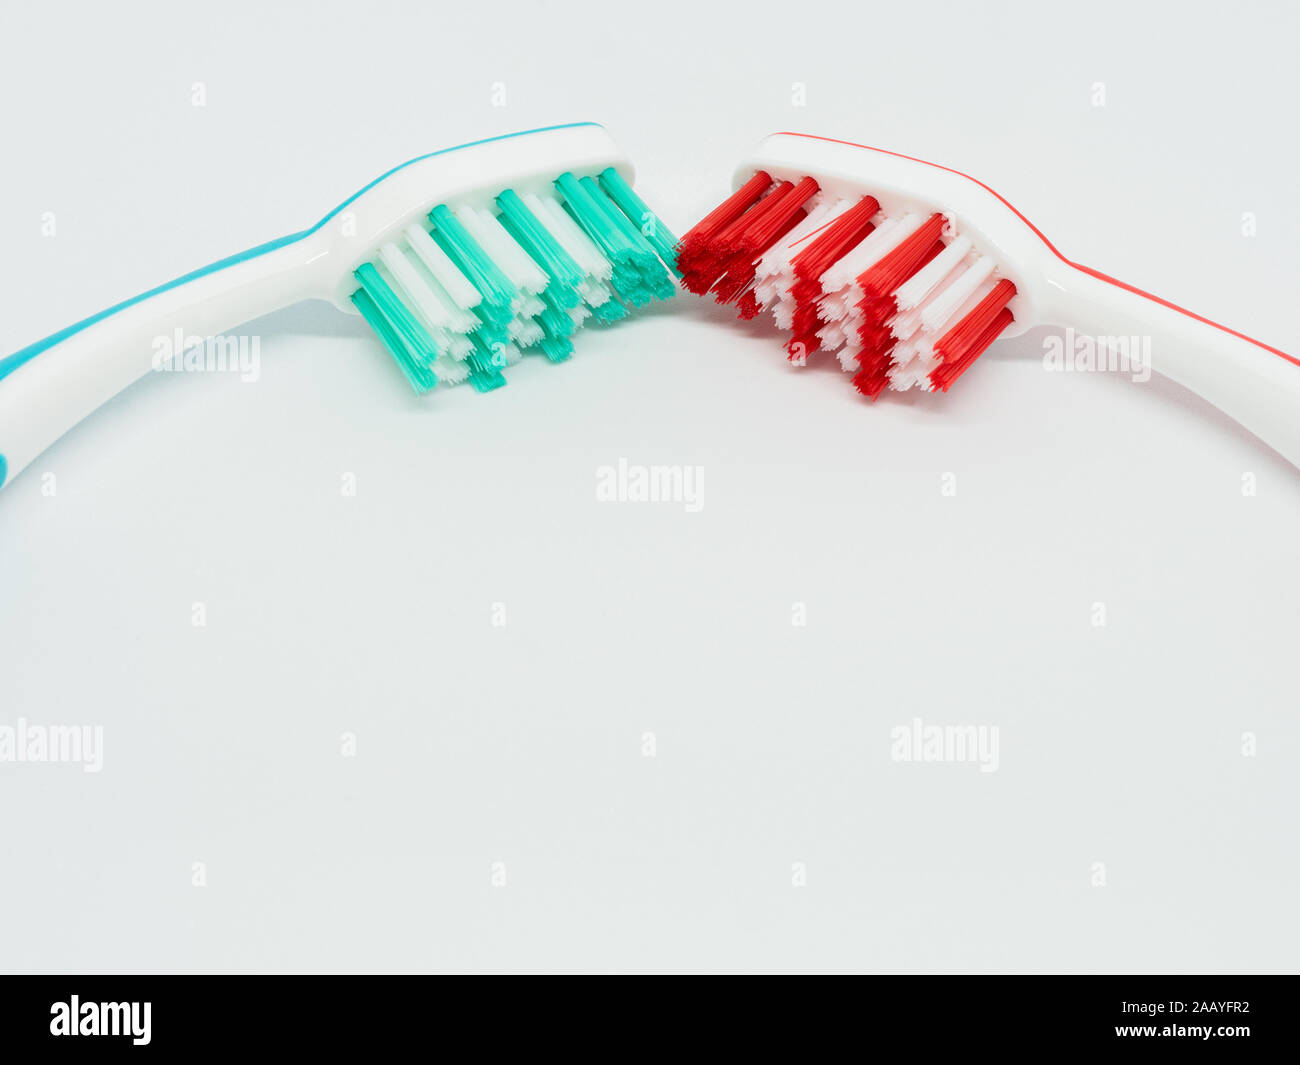 two-tone toothbrushes on white background Stock Photo